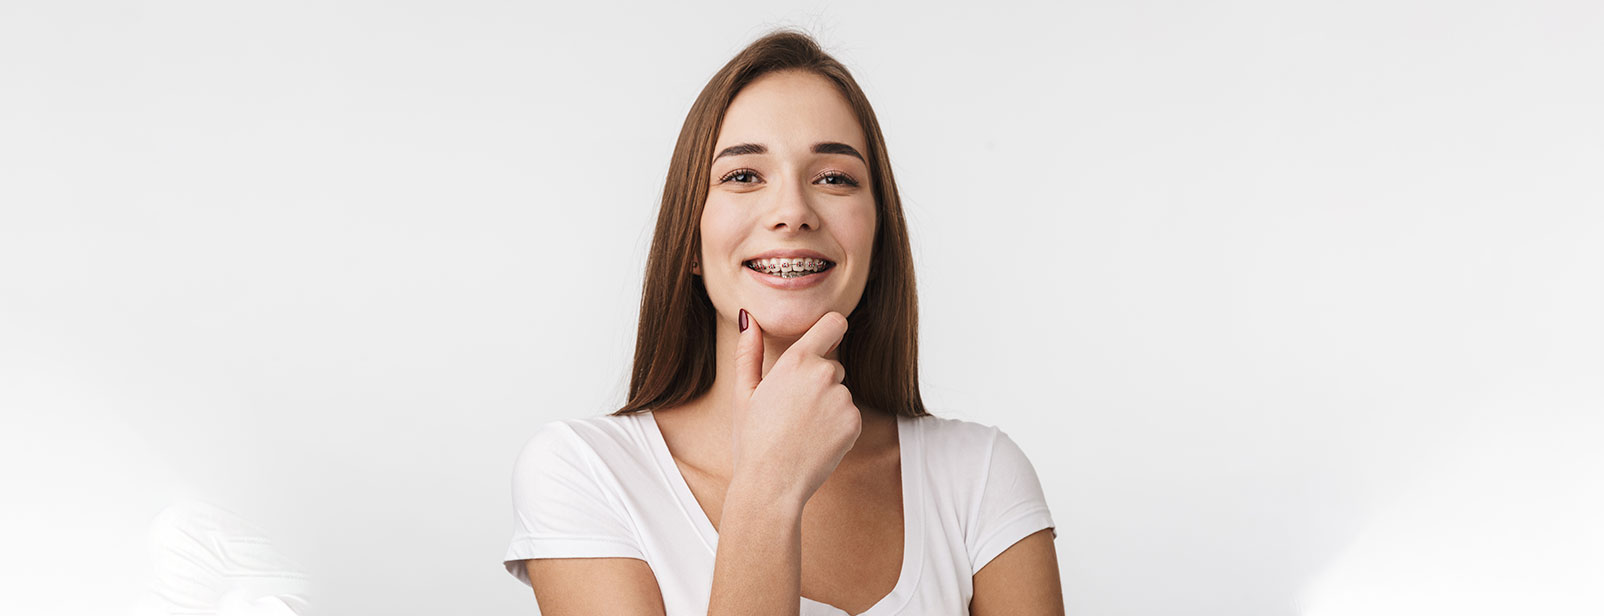 Getting Braces Tightened For the First Time? Here’s What You Need to Know